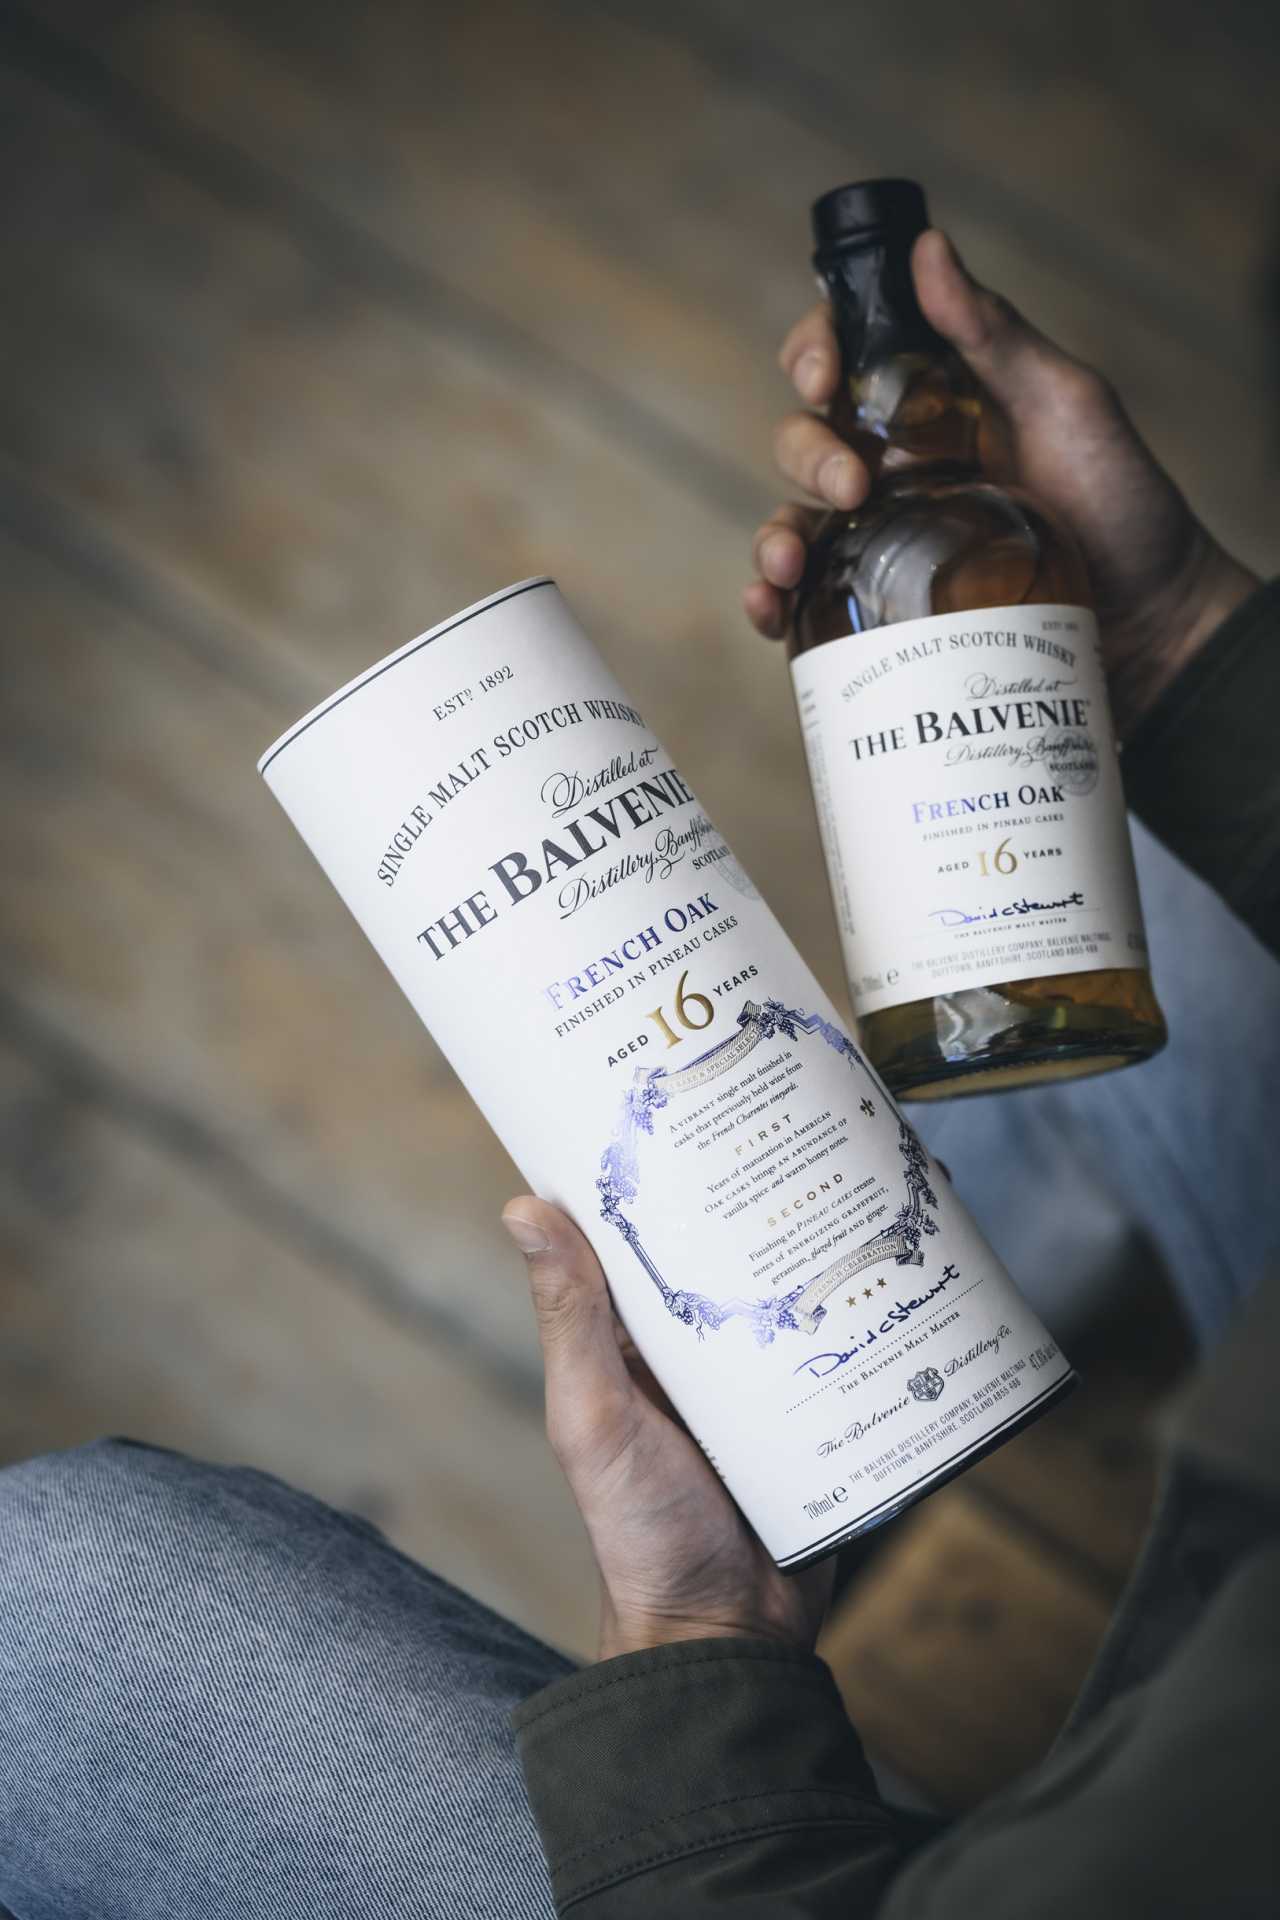 The Balvenie 16 Year Old French Oak